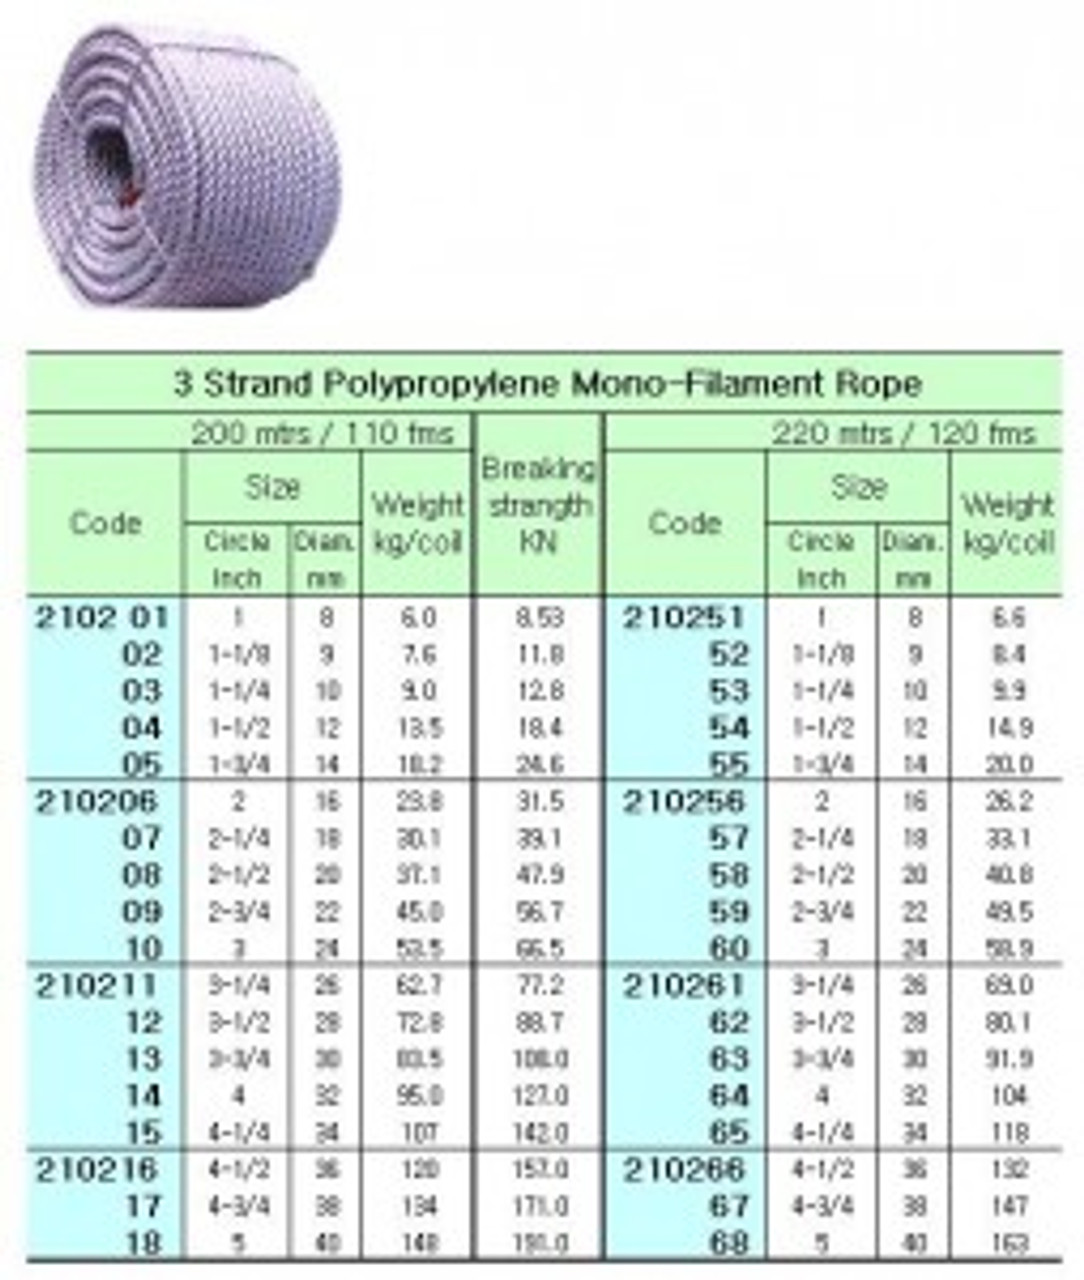 IMPA 210261 POLYPROPYLENE ROPE 26mm 3-strand coil of 220 mtr.